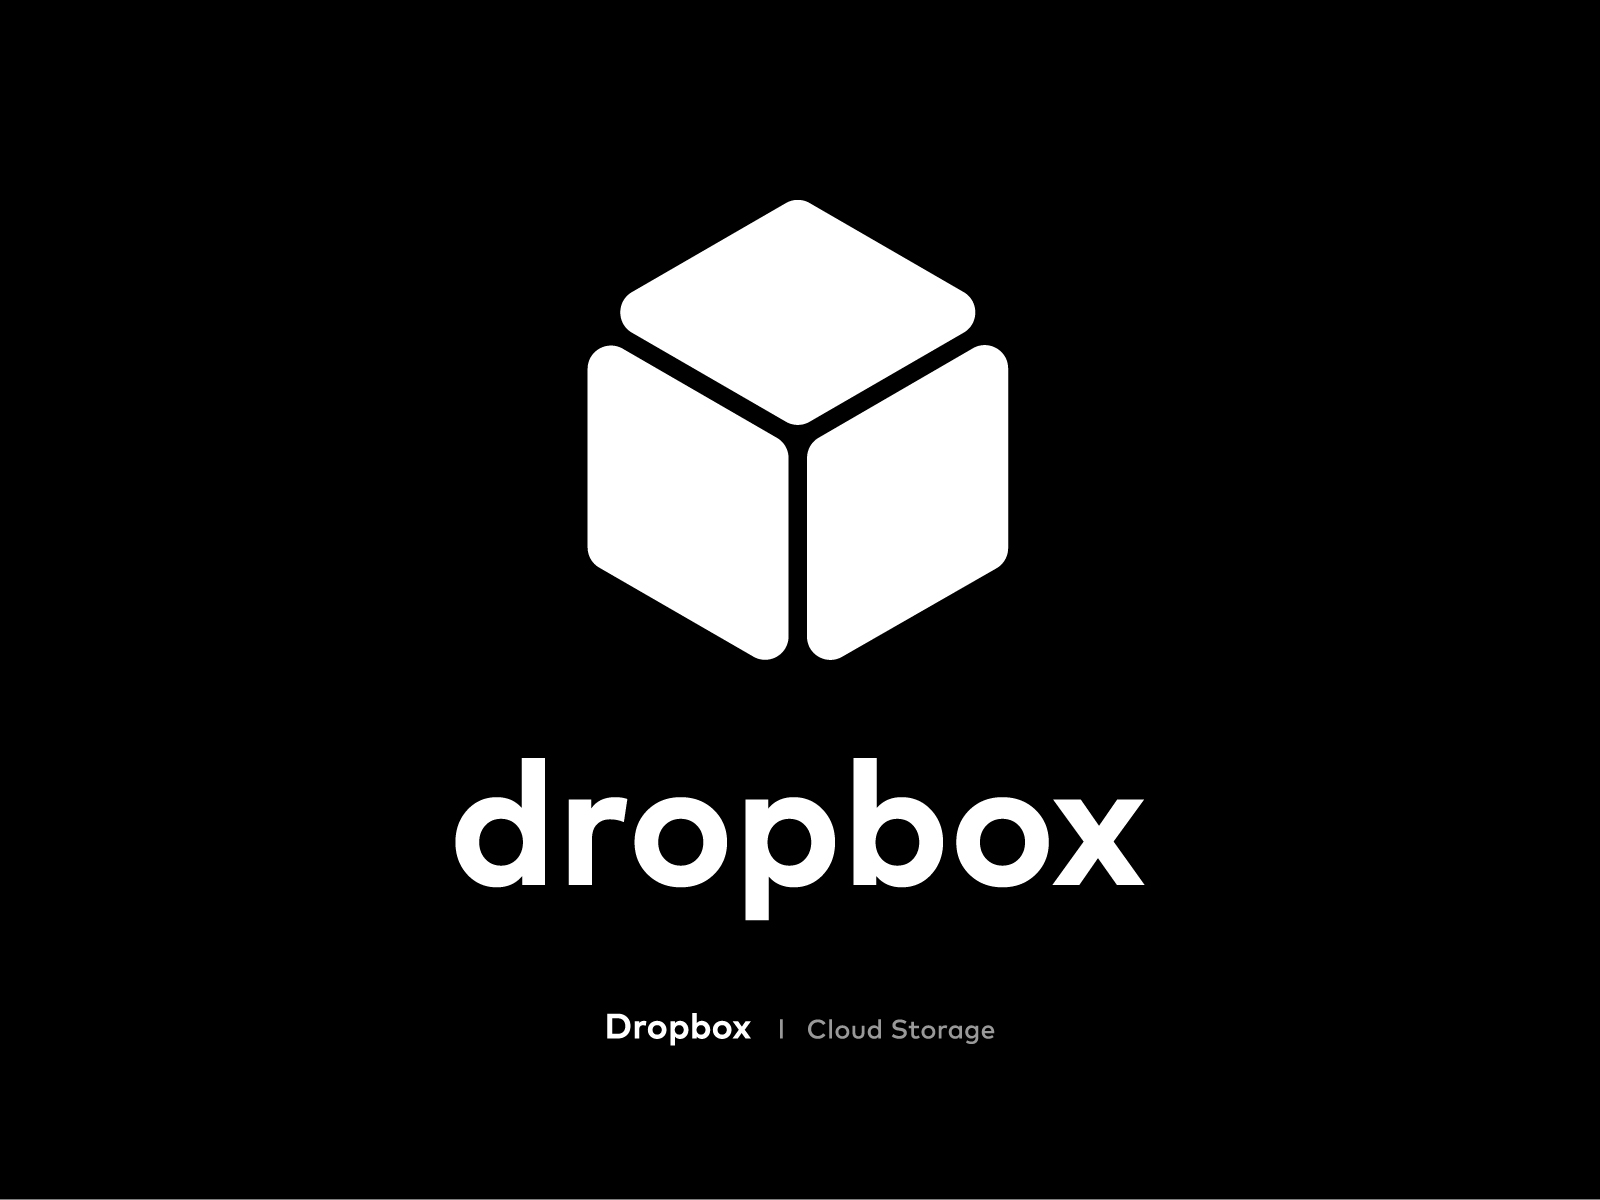 Change your Android wallpaper with Dropbox! - IFTTT